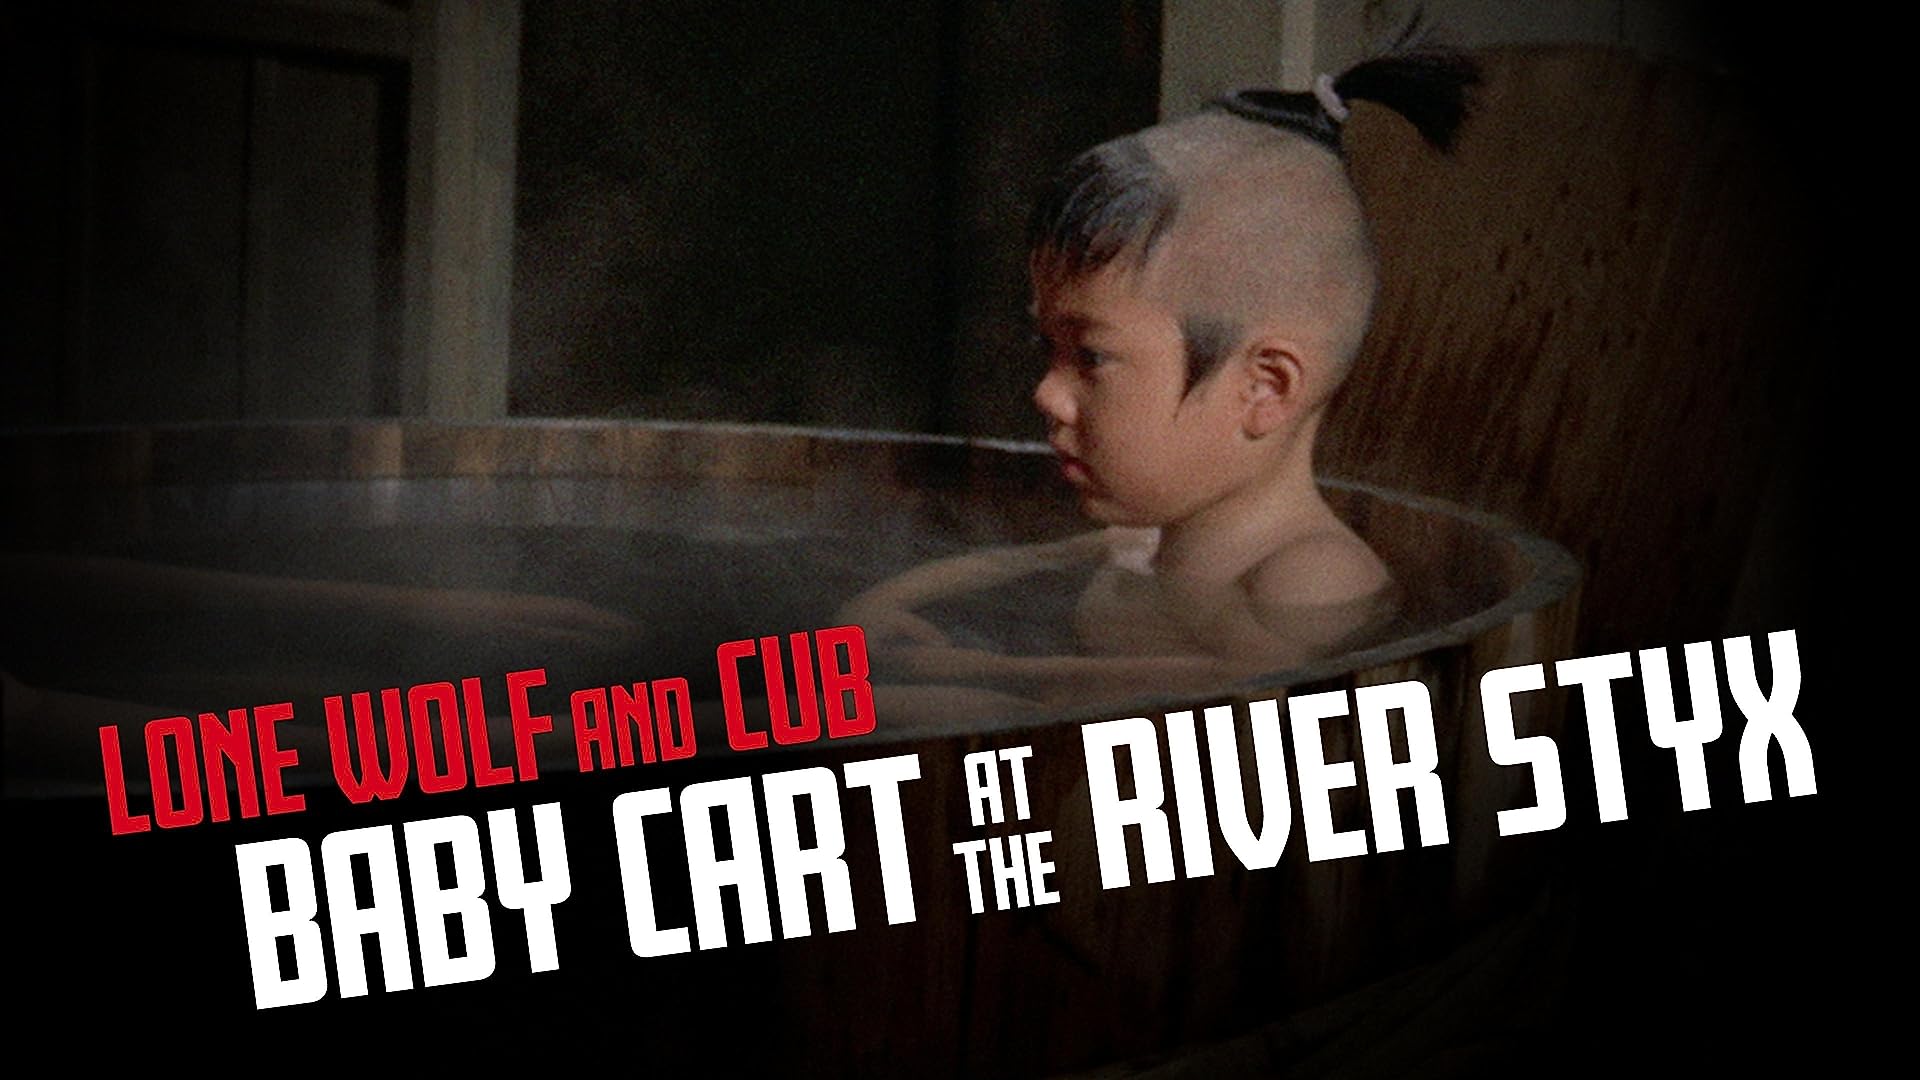 46-facts-about-the-movie-lone-wolf-and-cub-baby-cart-at-the-river-styx